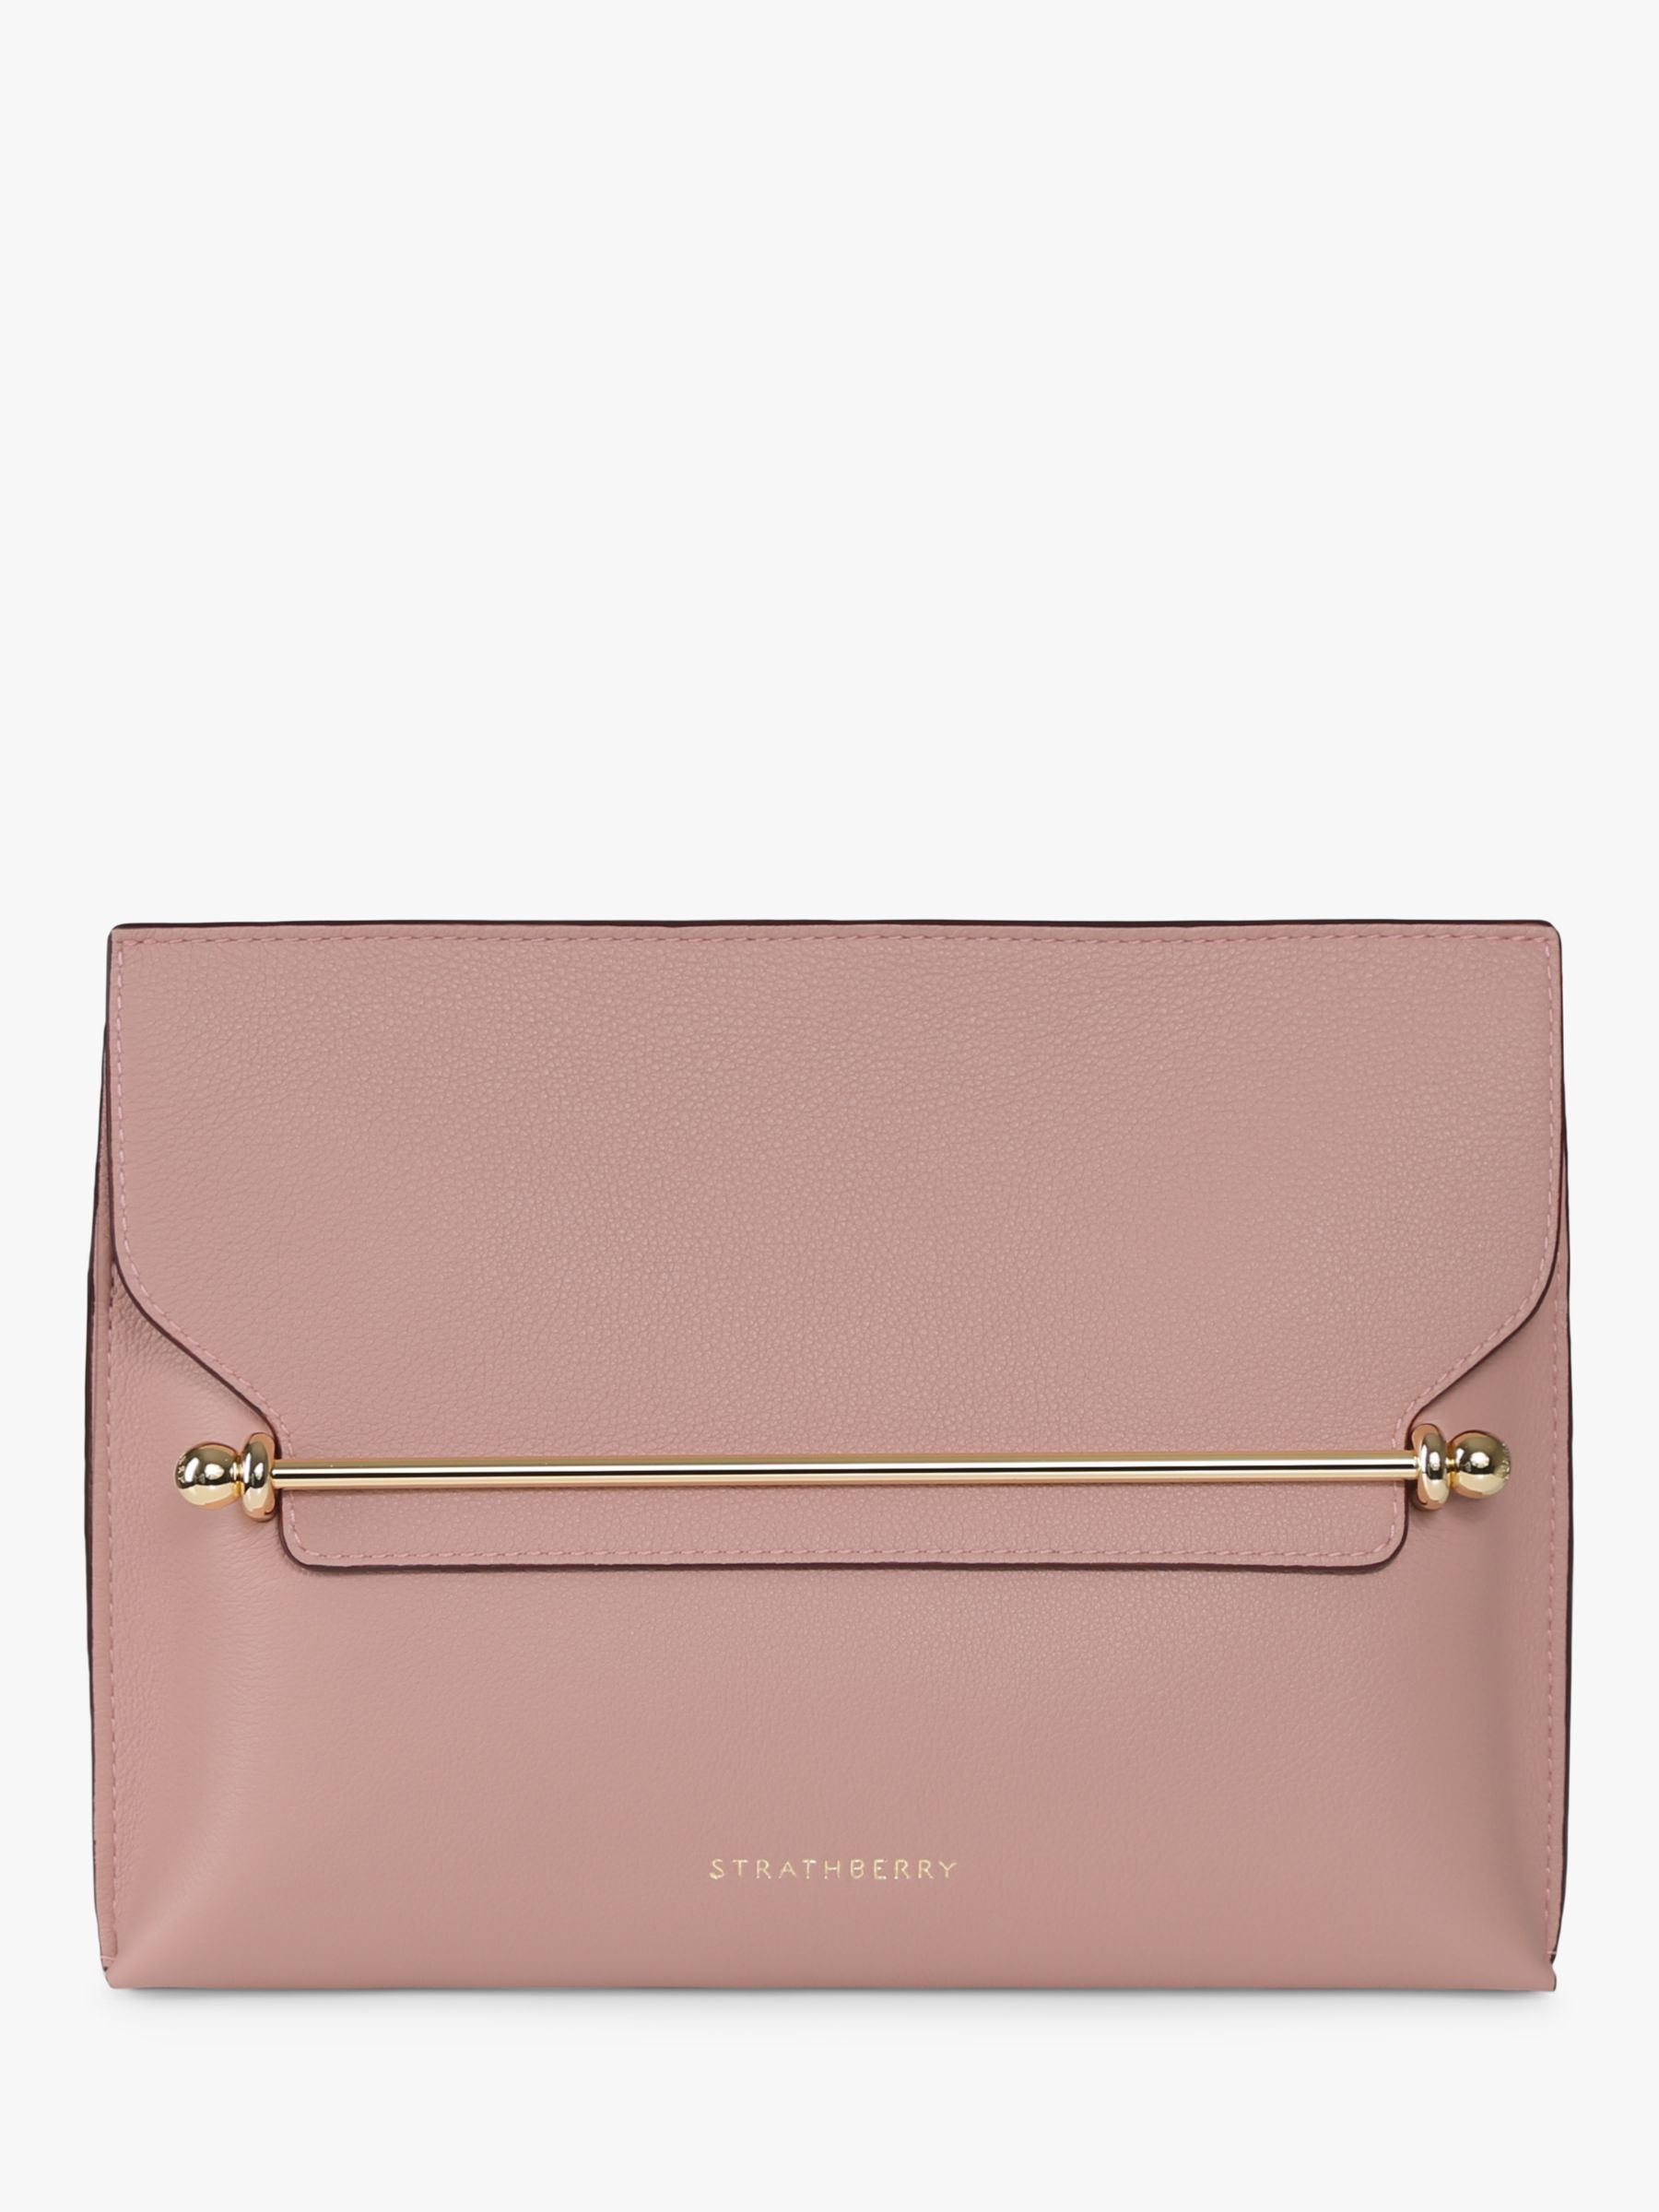 Strathberry Stylist Leather Clutch Bag, Blush Rose at John Lewis & Partners